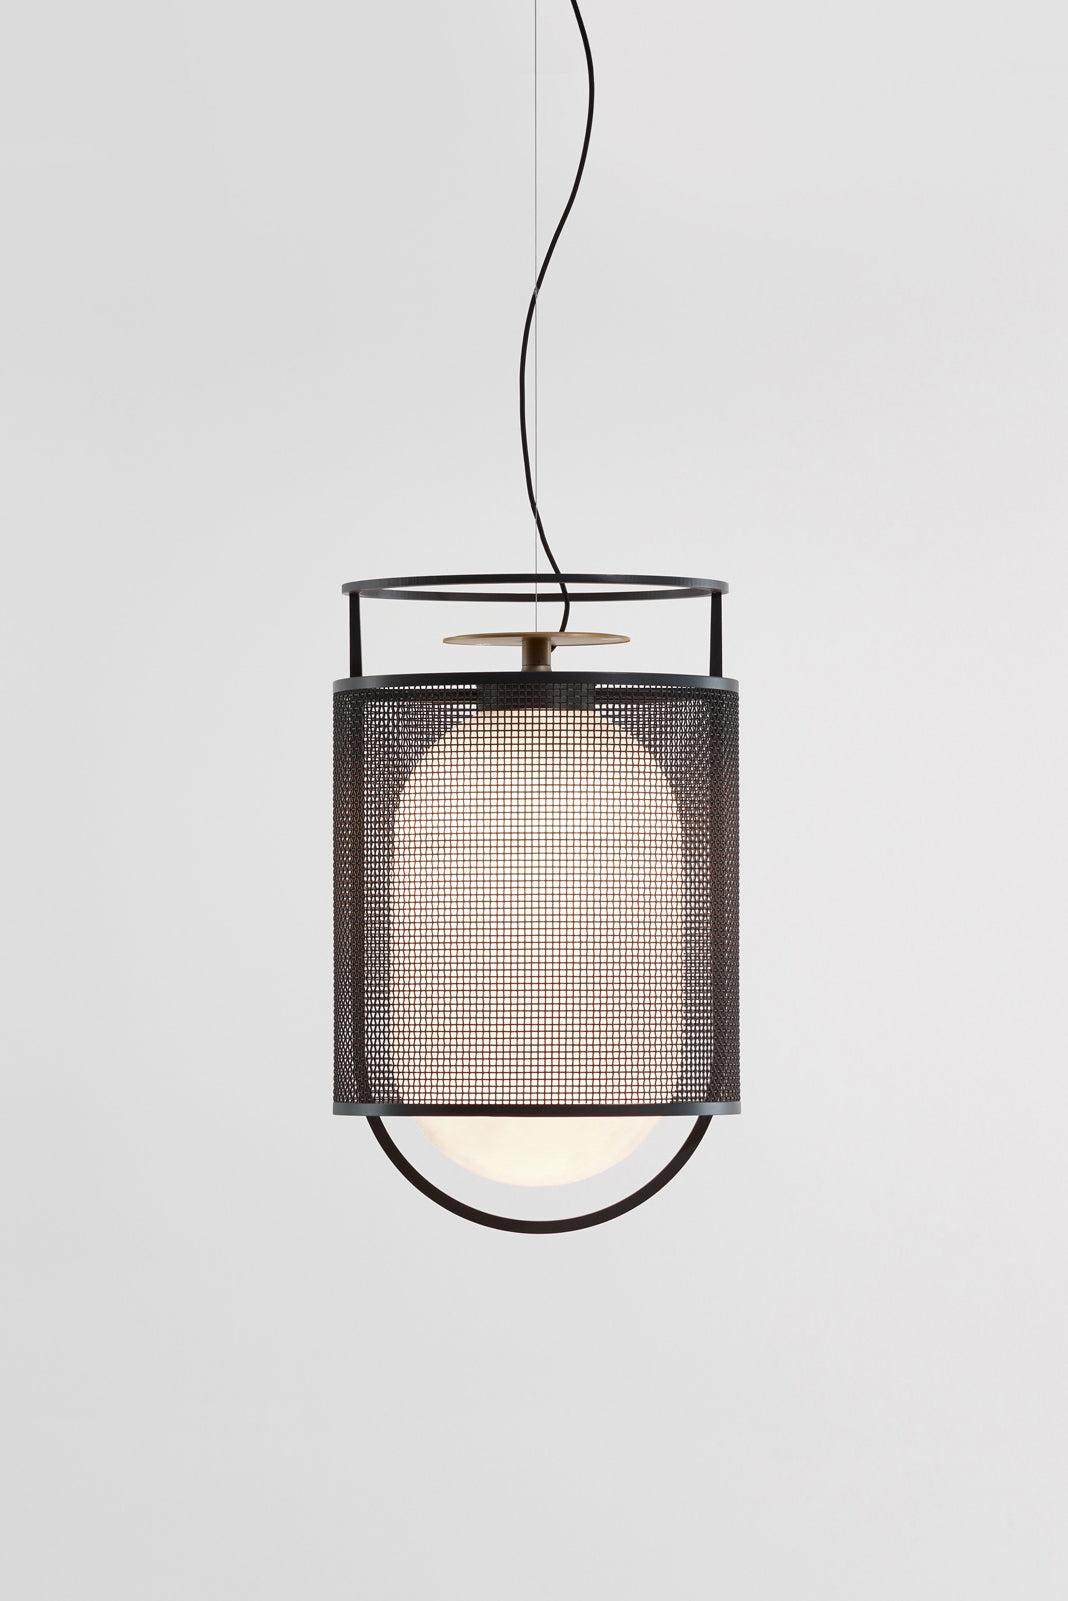 DENGLONG T GR

Tough and ambitious collection. Big, sturdy and suitable for indoors as well as outdoors (IP65). All of these while maintaining an intrinsic beauty.

Suspension lamp. Anthracite lacquered aluminium structure and steel mesh. Top disc